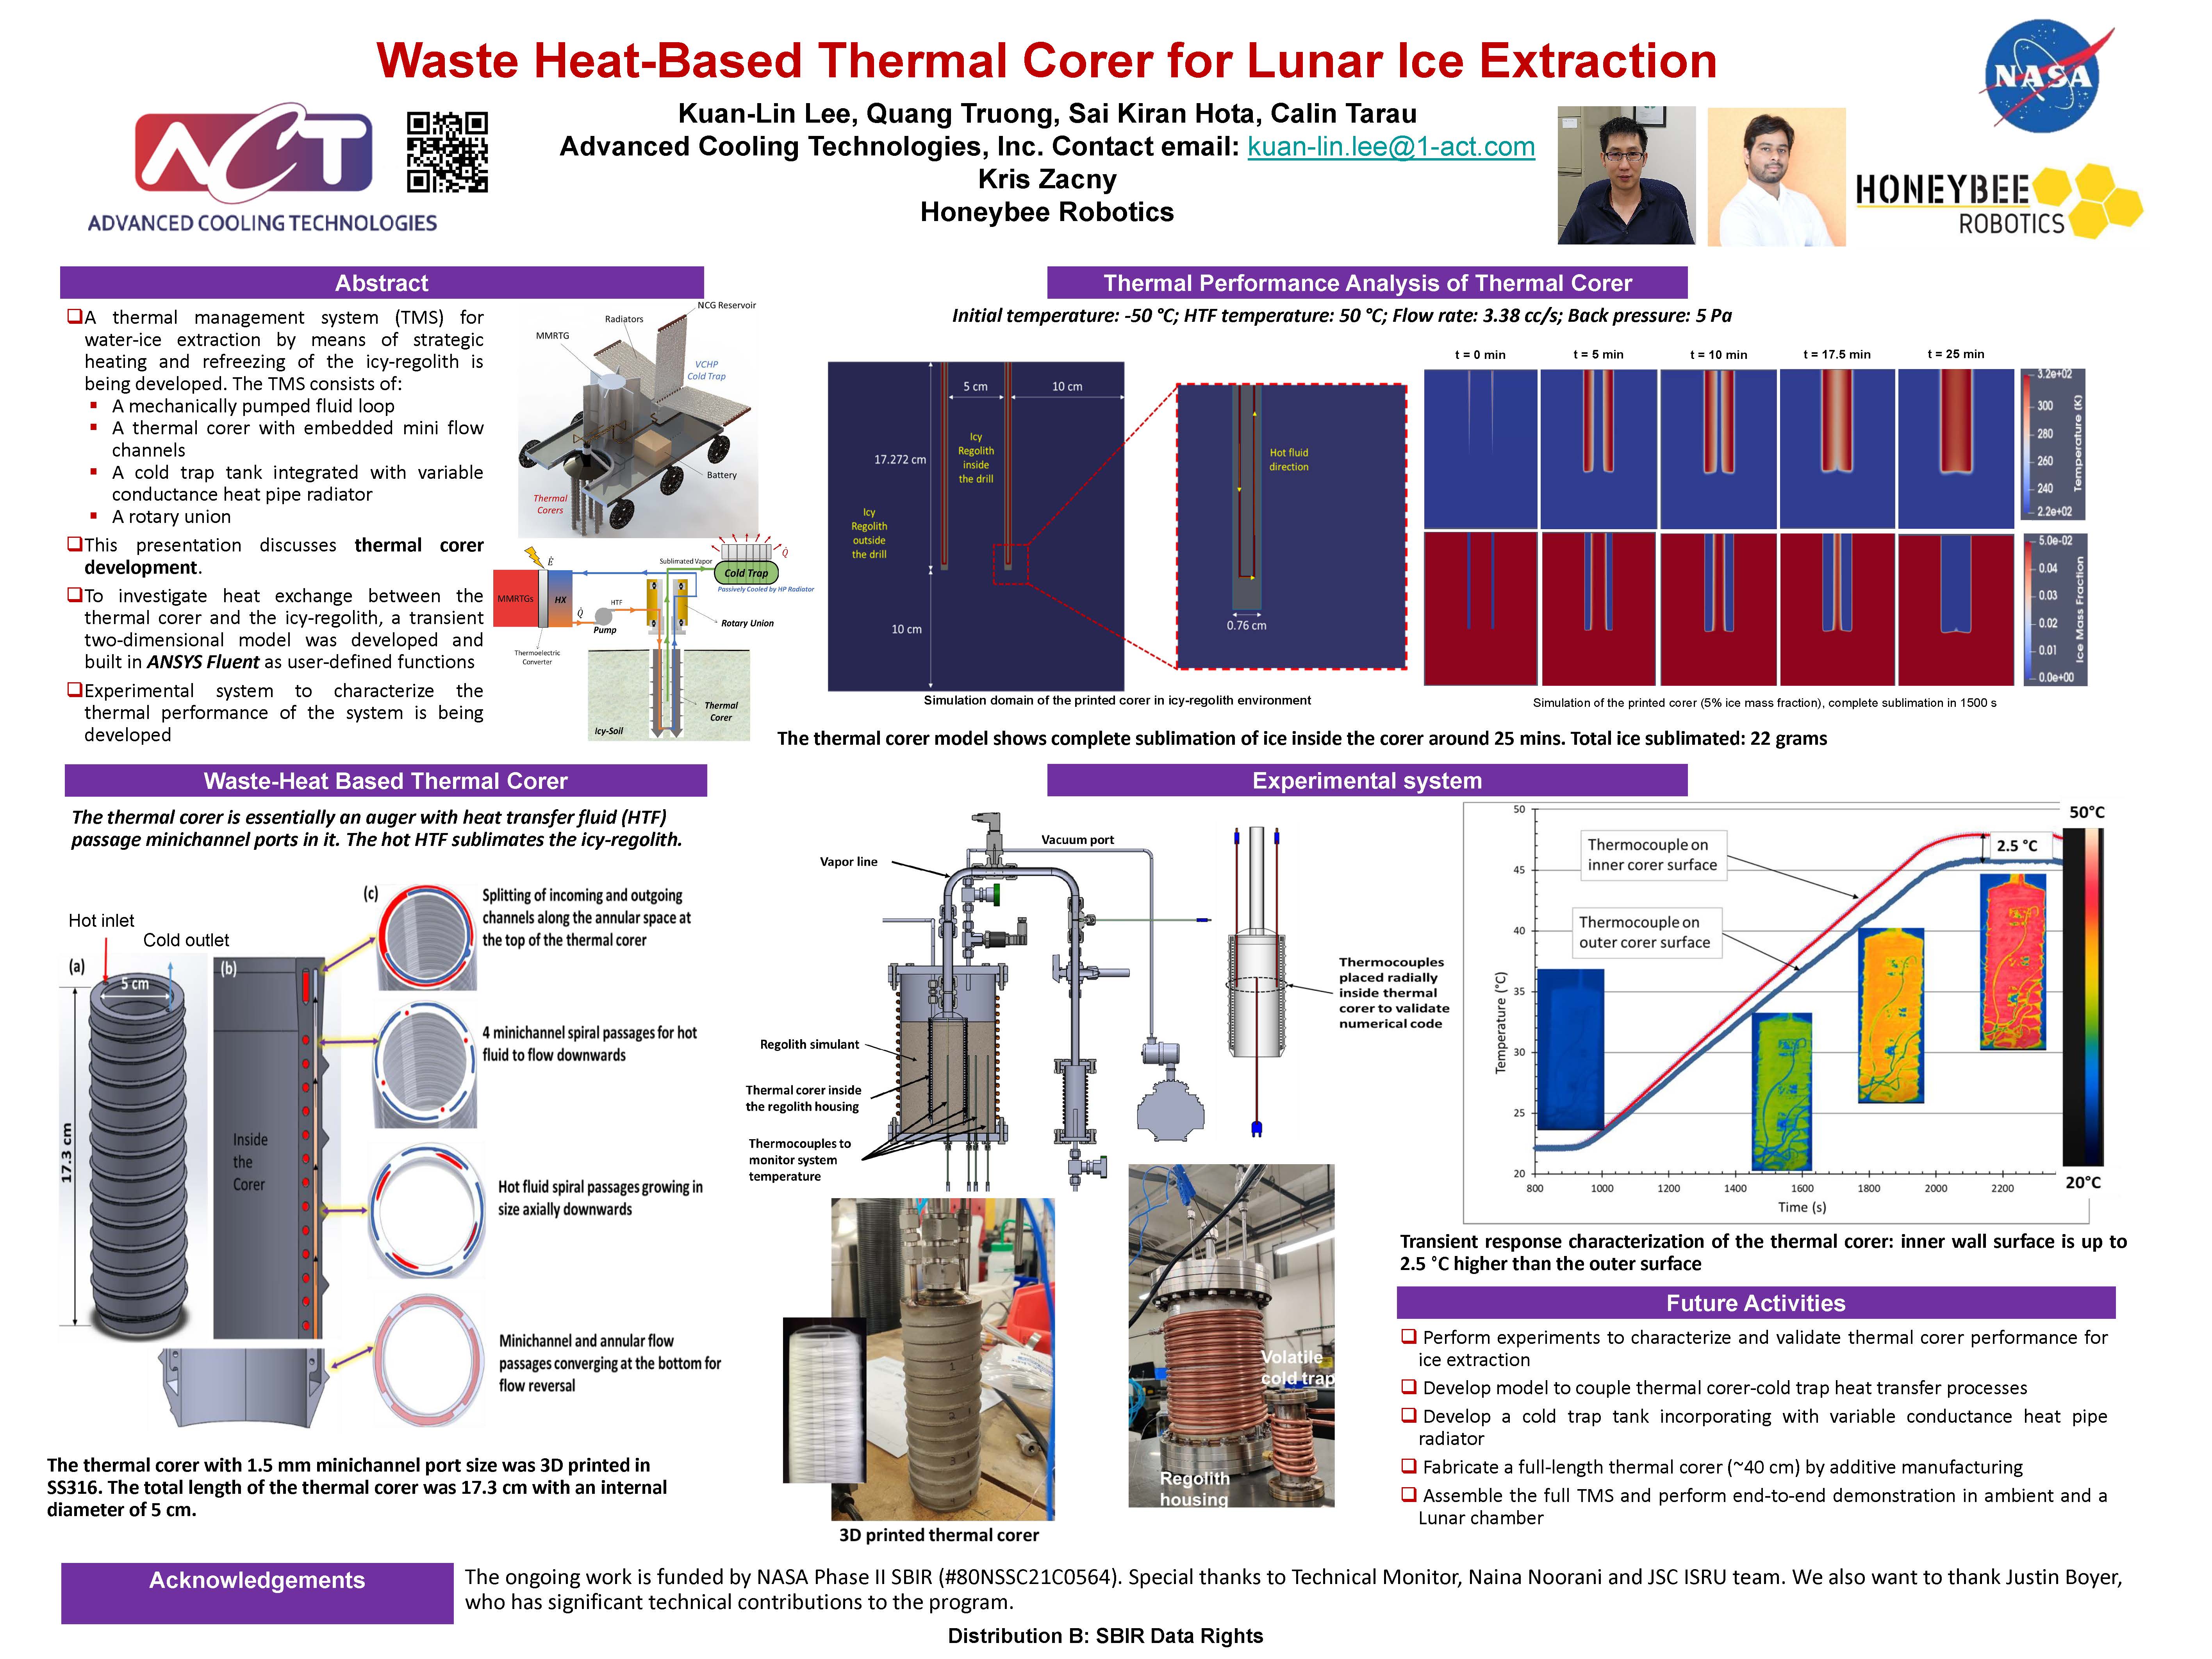 Waste Heat-Based Thermal Corer for Lunar Ice Extraction